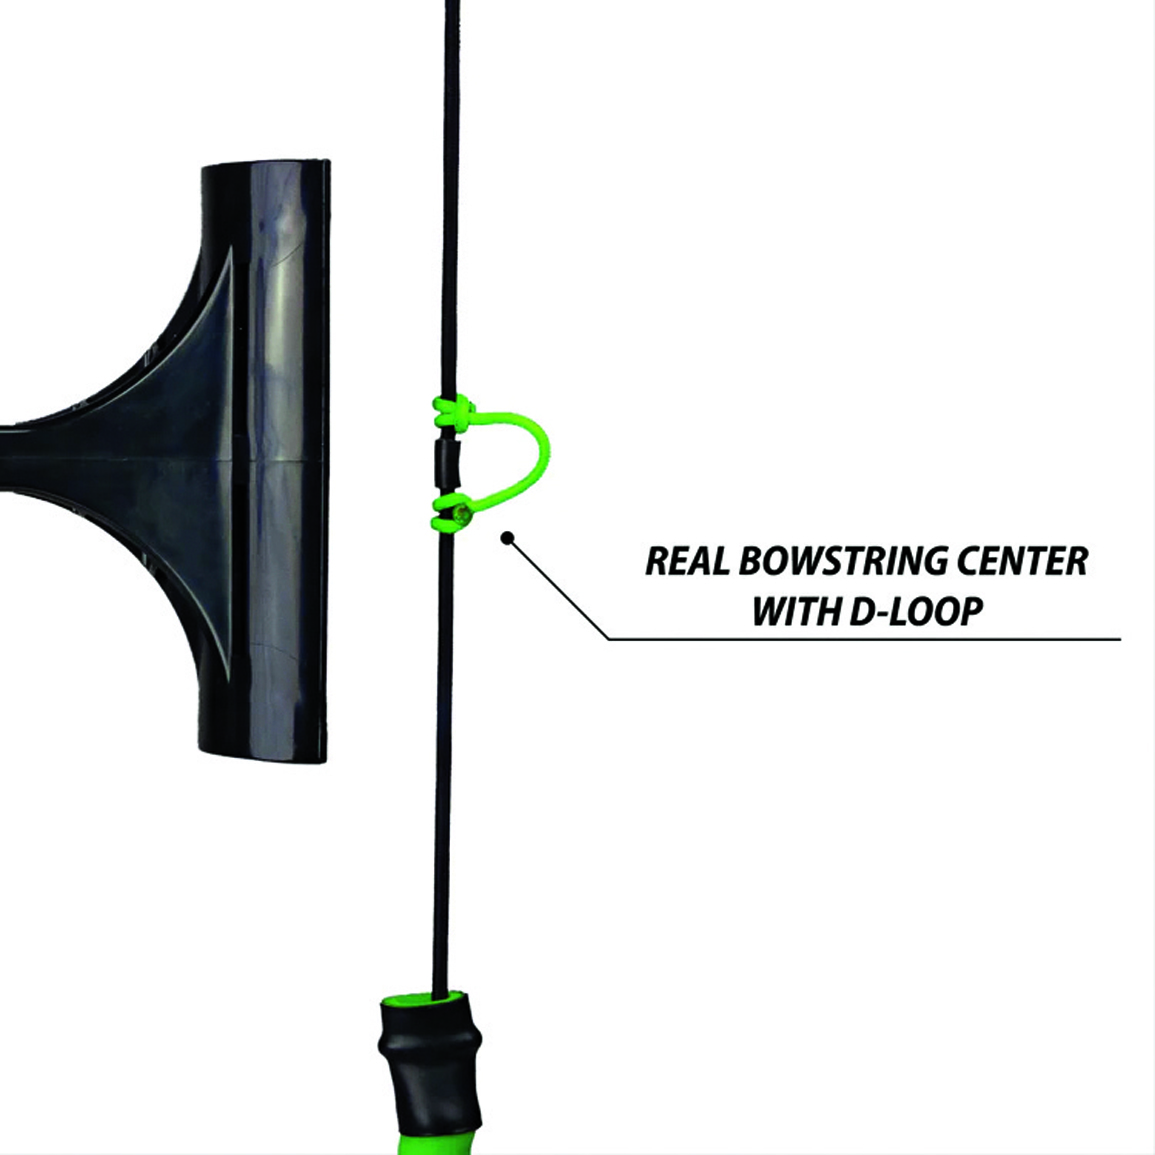 AccuBow 2.0 Green Mantis Archery Trainer